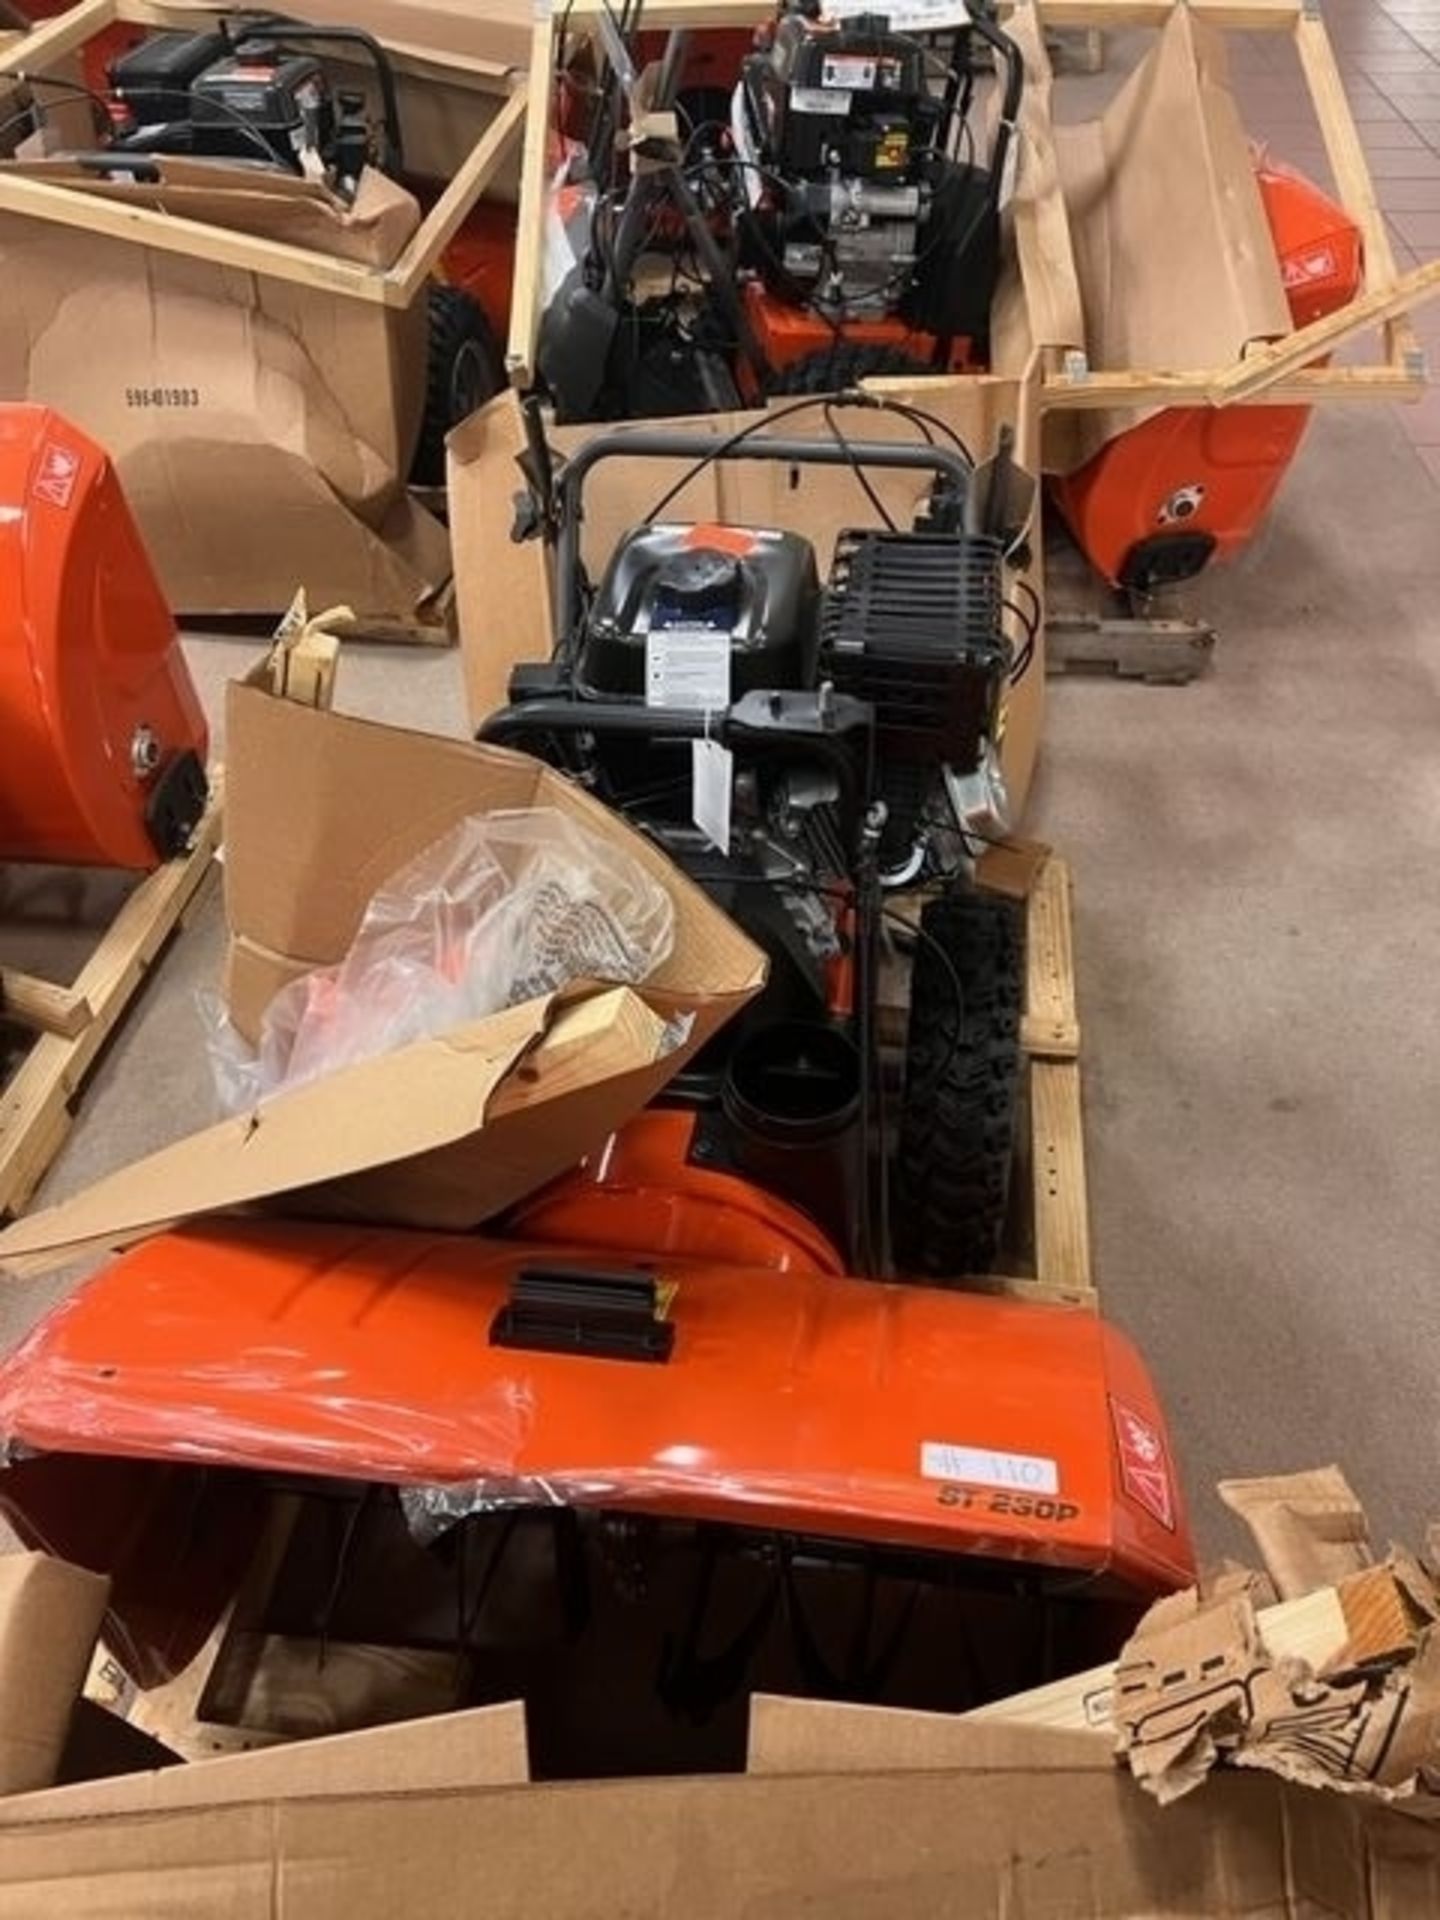 Husqvarna ST 230P Self Propelled Snow Blower - Approx. MSRP $1299 - Image 4 of 5